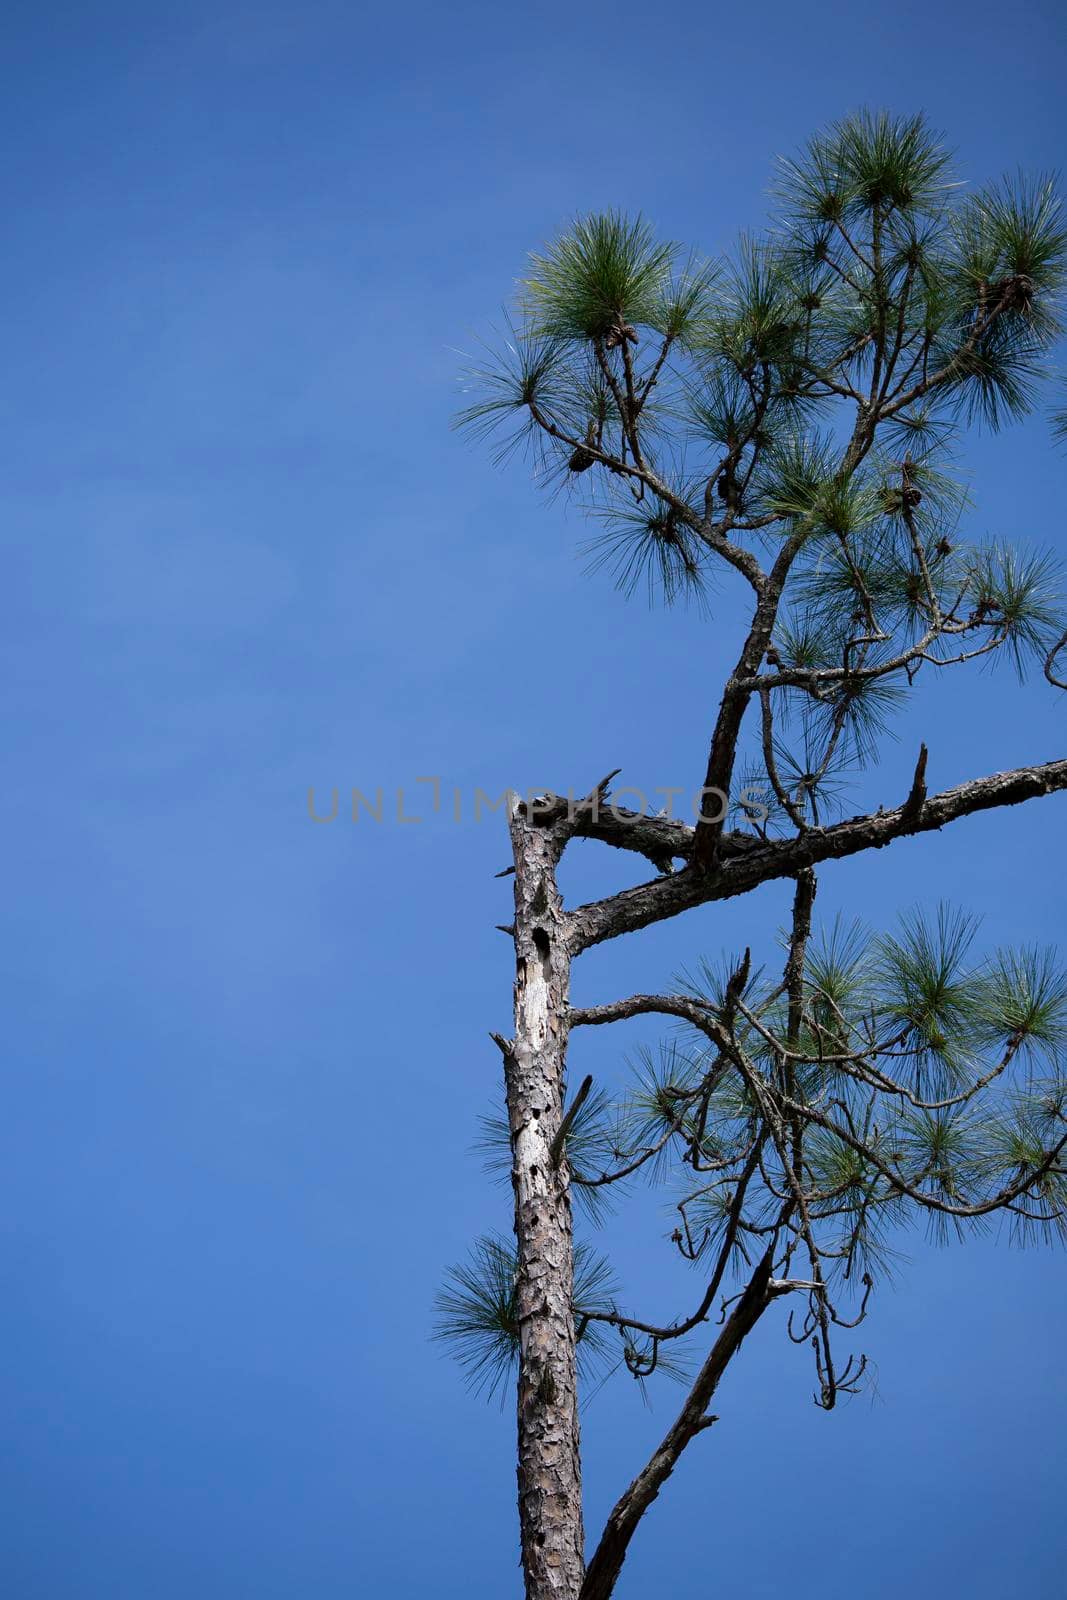 Pine tree with a broken top from storm damage